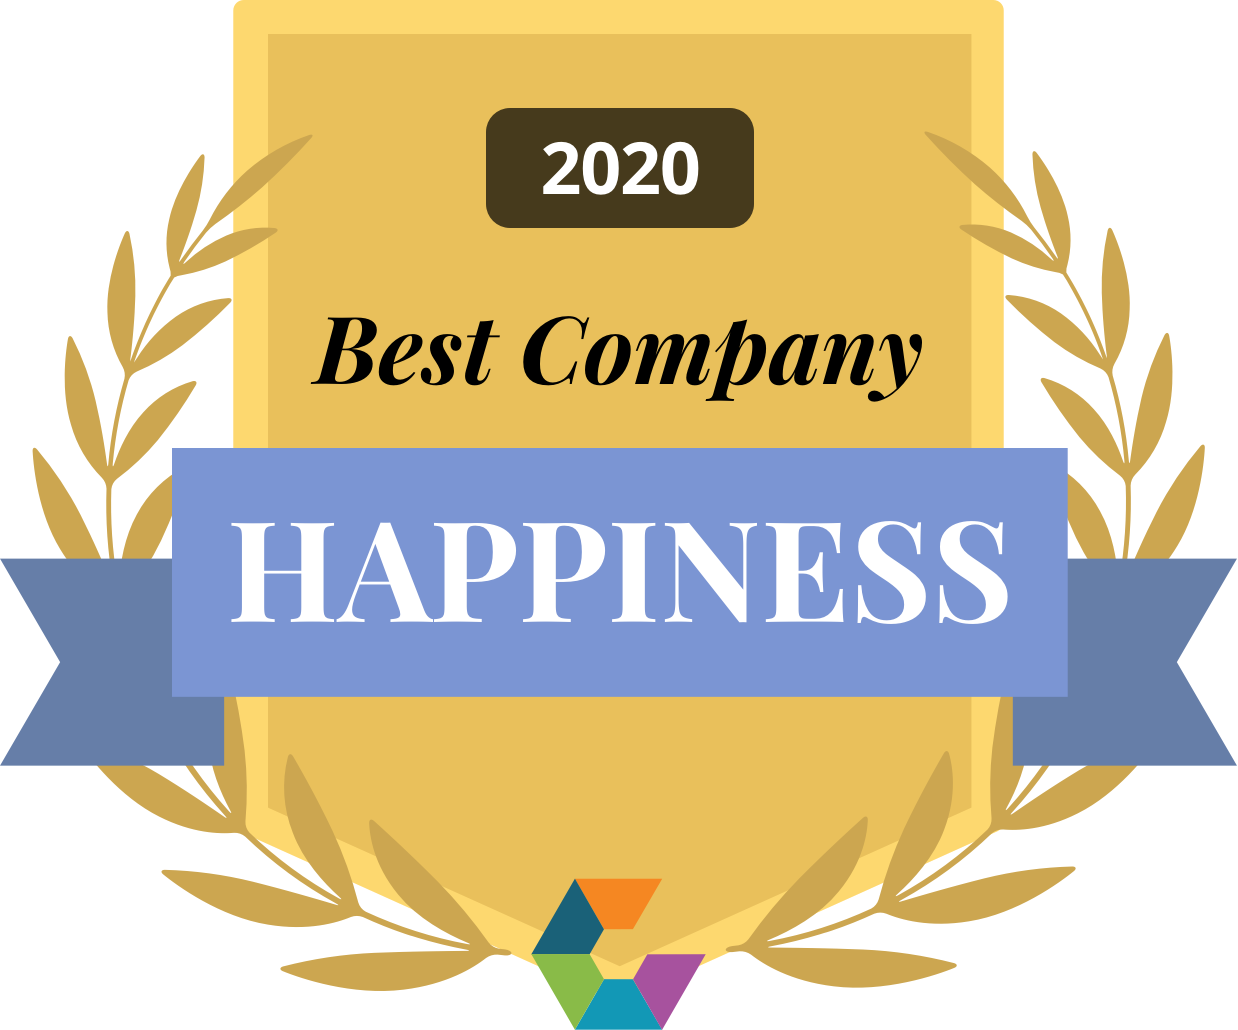 Comparably- Happiest Employees 2020